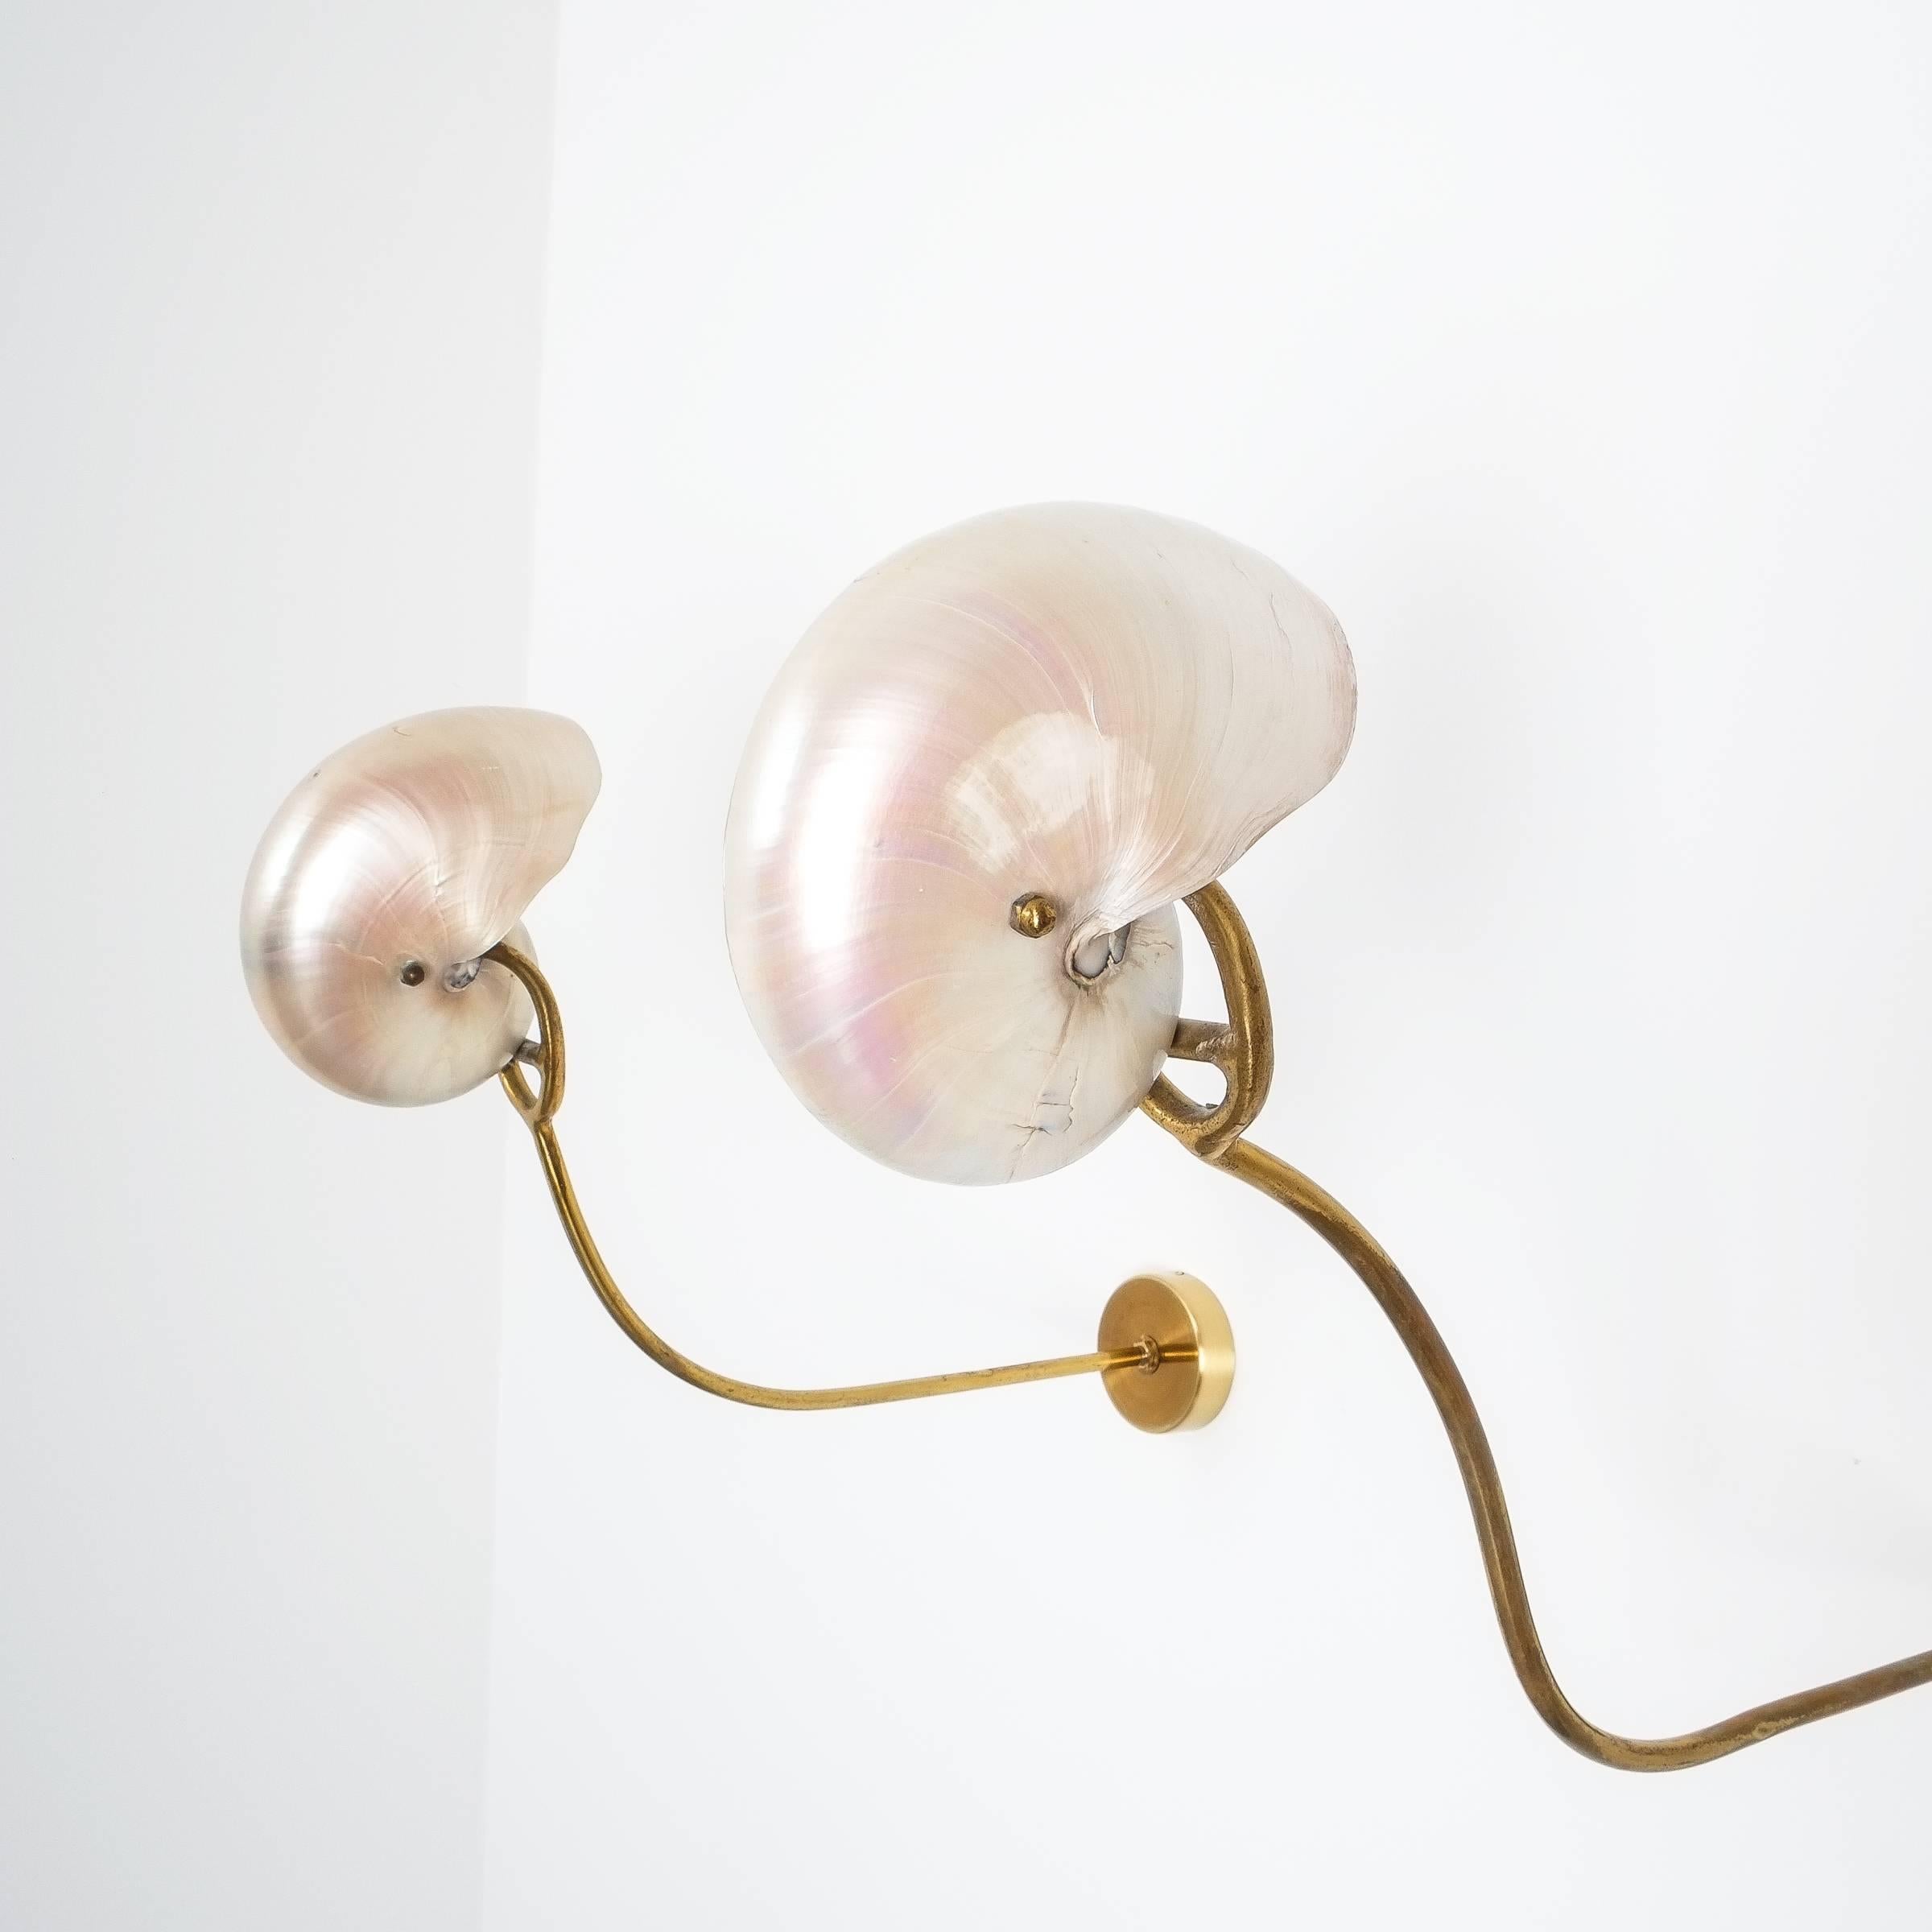 Nautilus shell mother-of-pearl sconces wall lights brass, Italy, 1950. Rare extraordinary pair of Nautilus shell wall lamps each with an individual brass fitting. They are slightly different in shape but working beautifully as a pair. Measurements